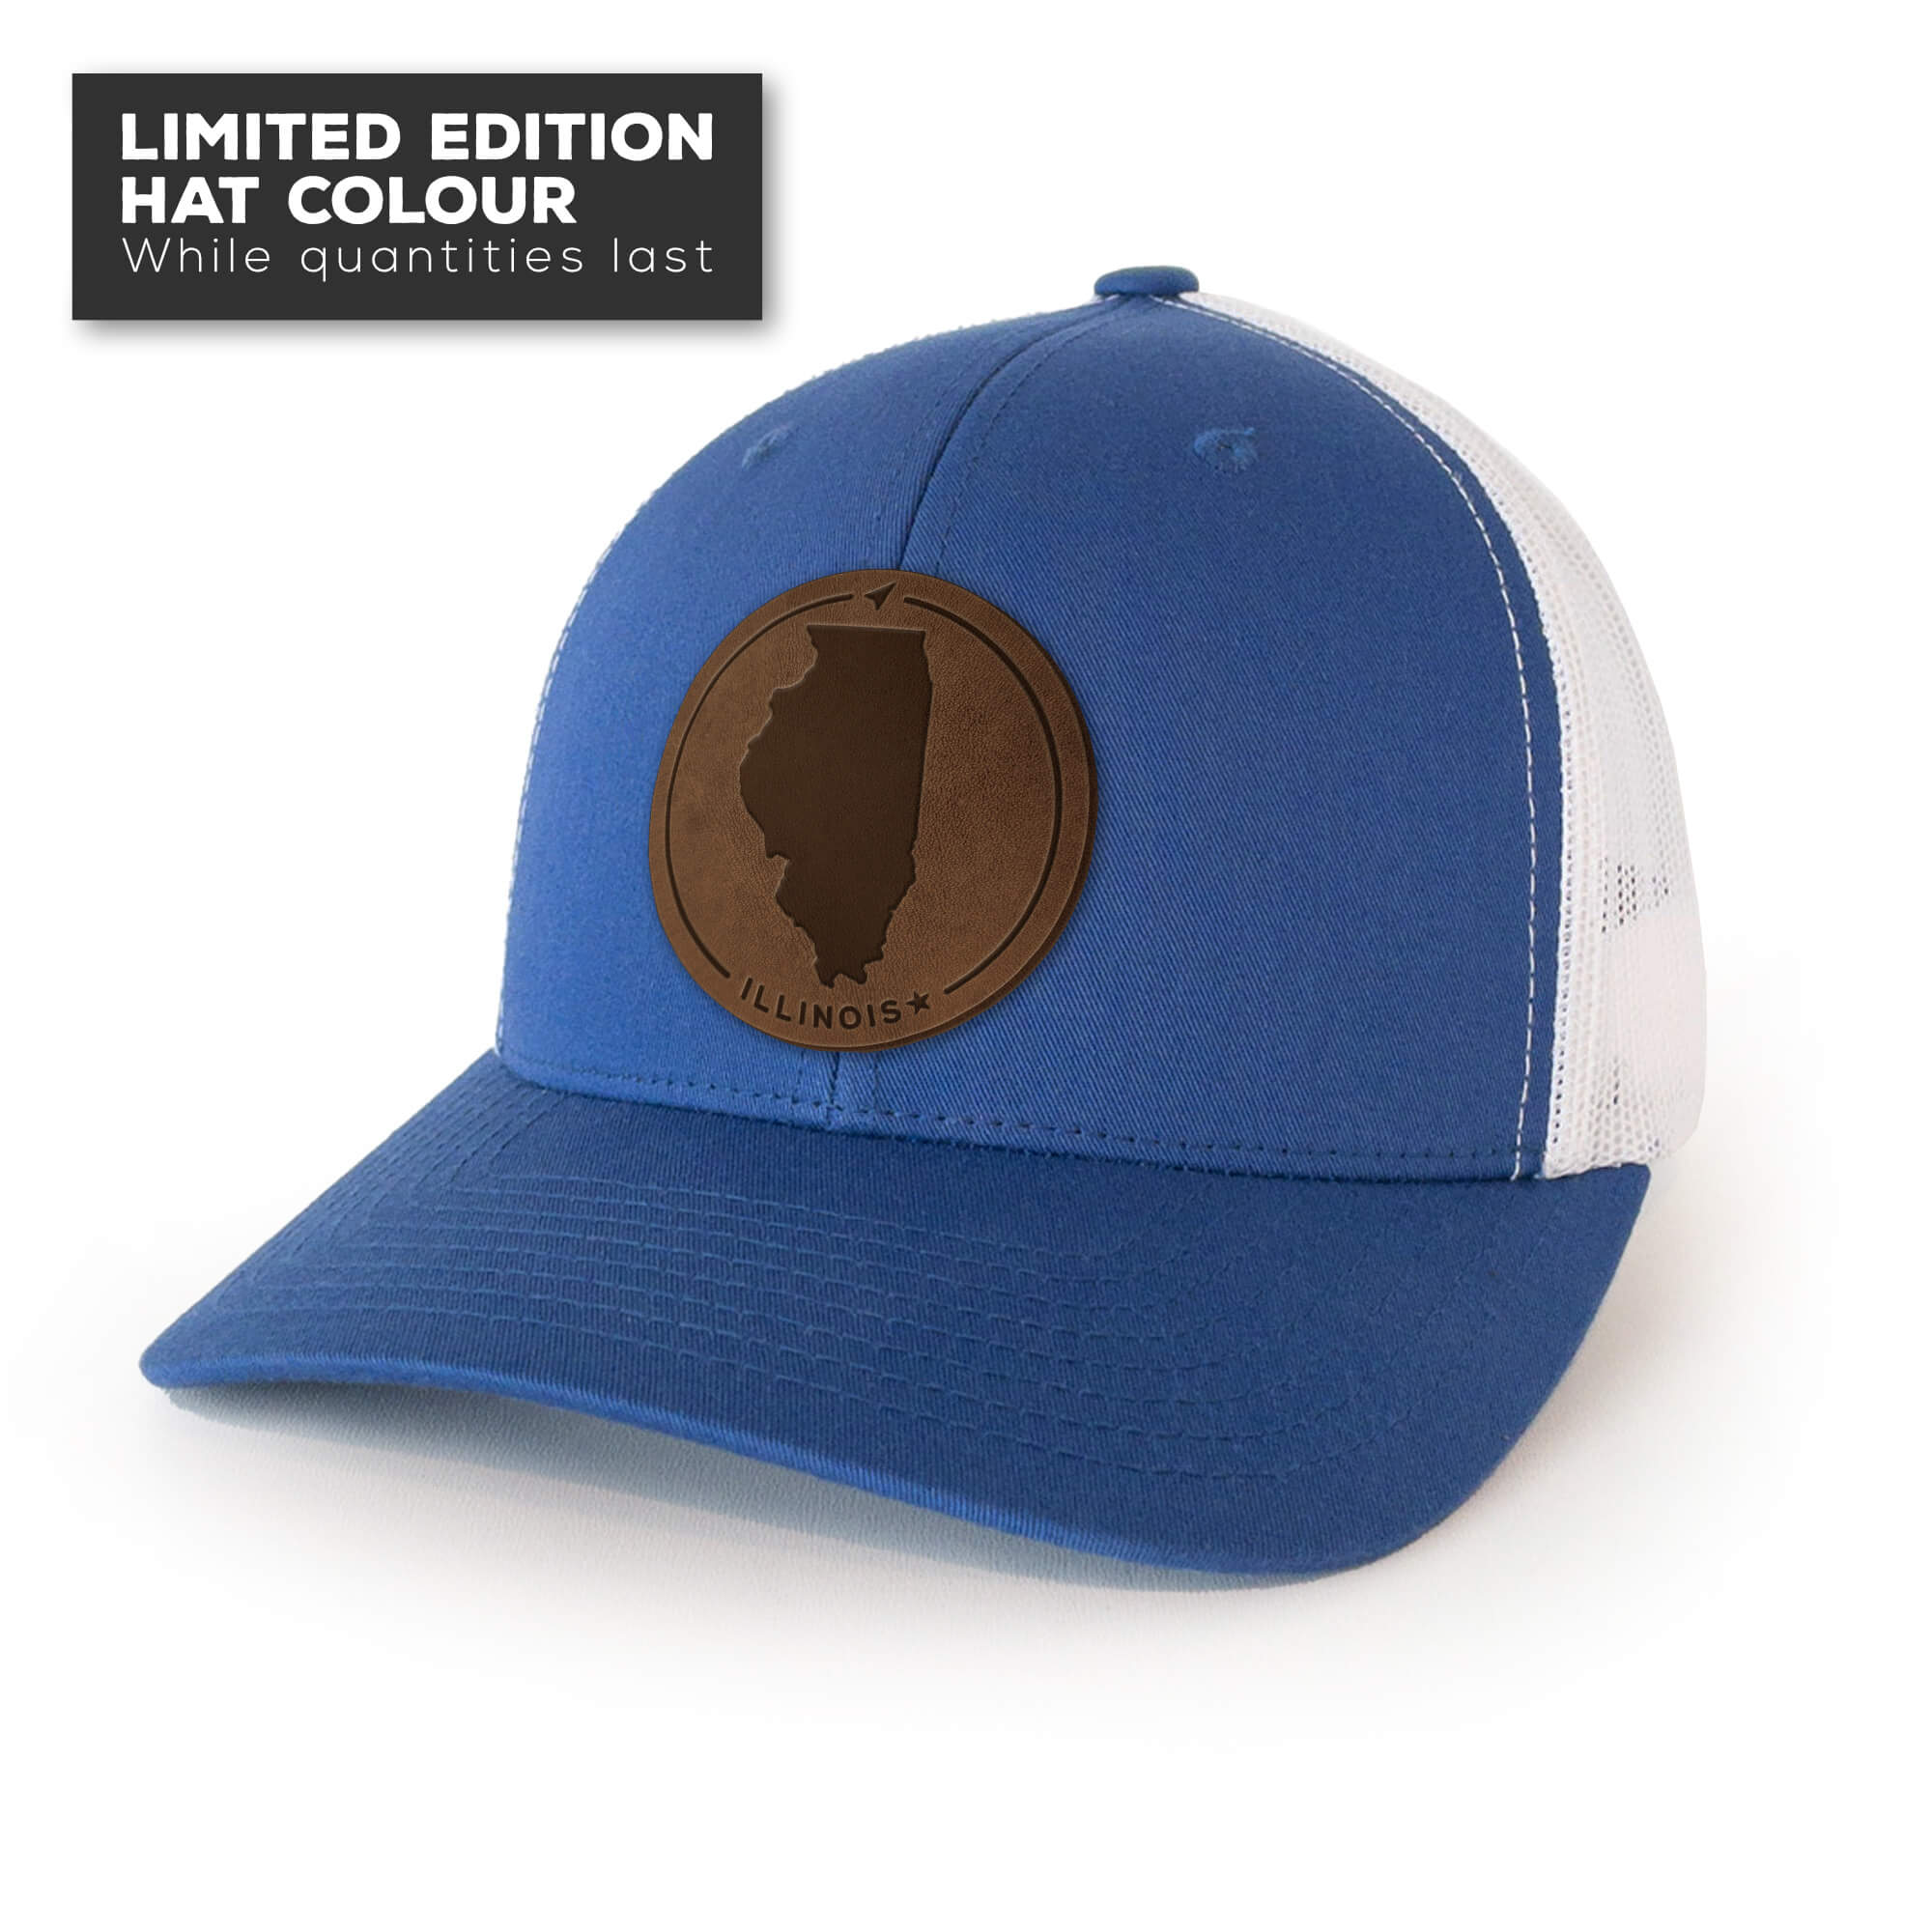 Royal Blue trucker hat with full-grain leather patch of Illinois